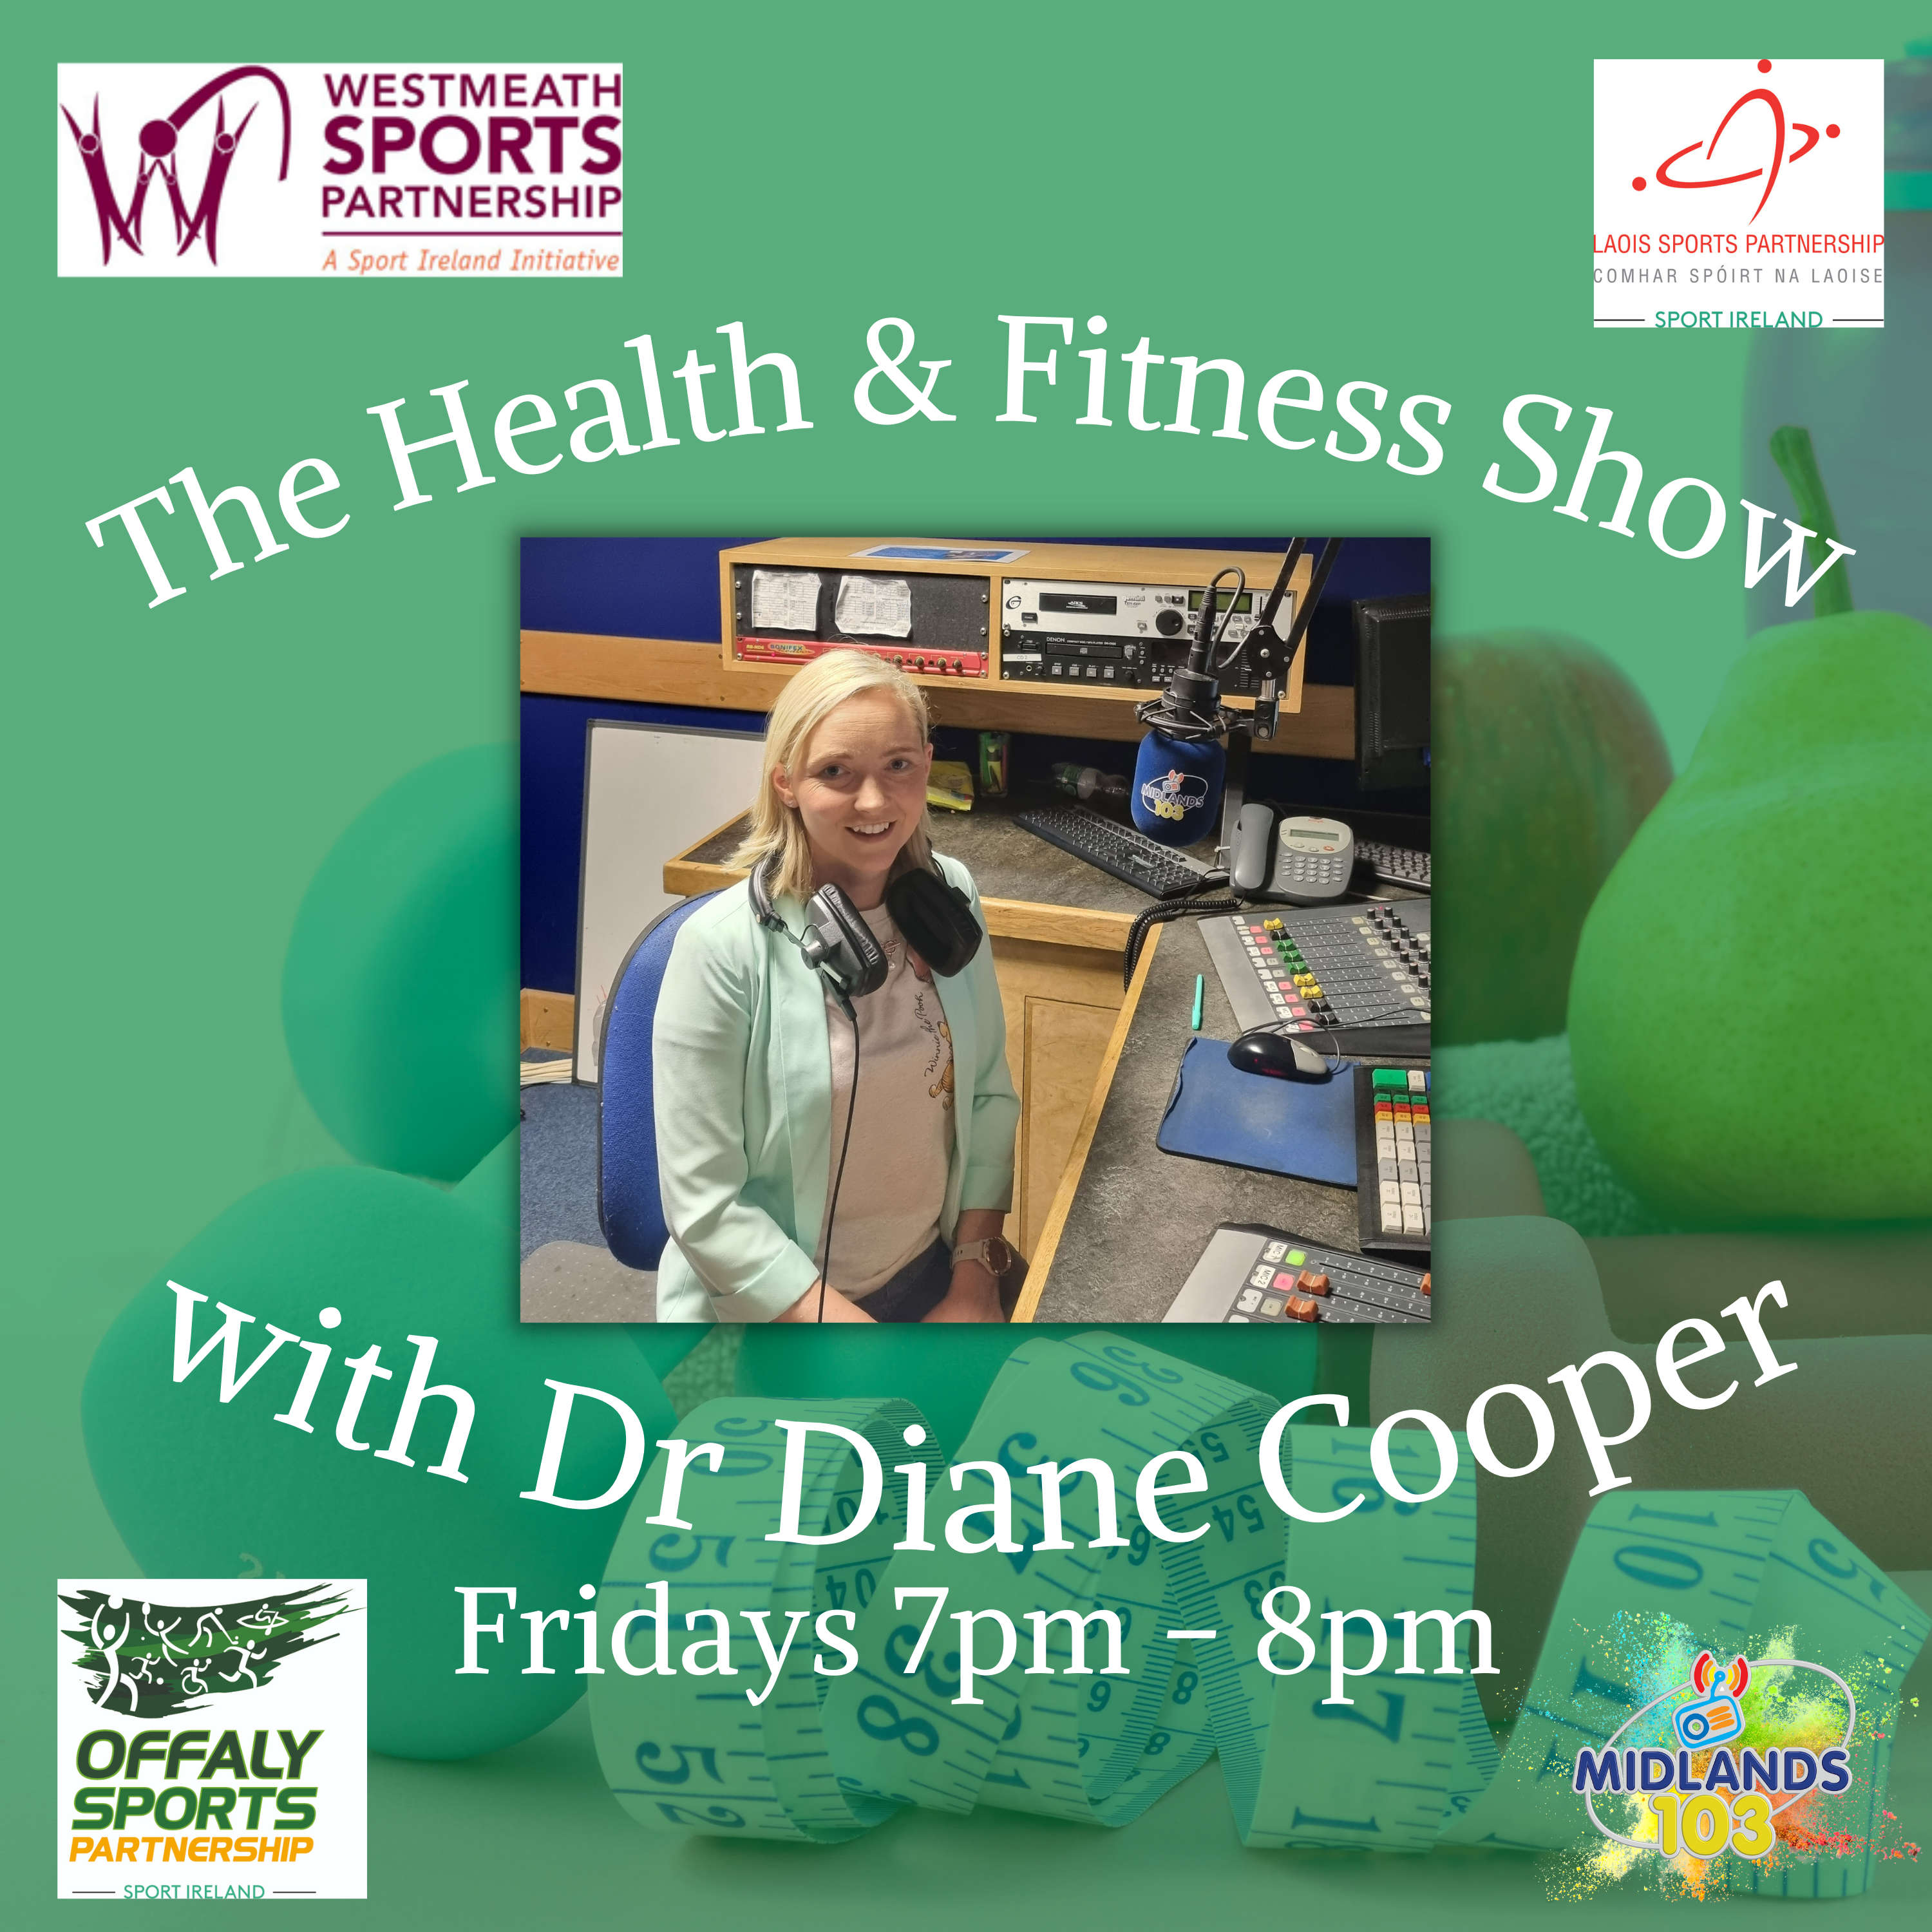 The Health and Fitness Show with Dr Diane Cooper